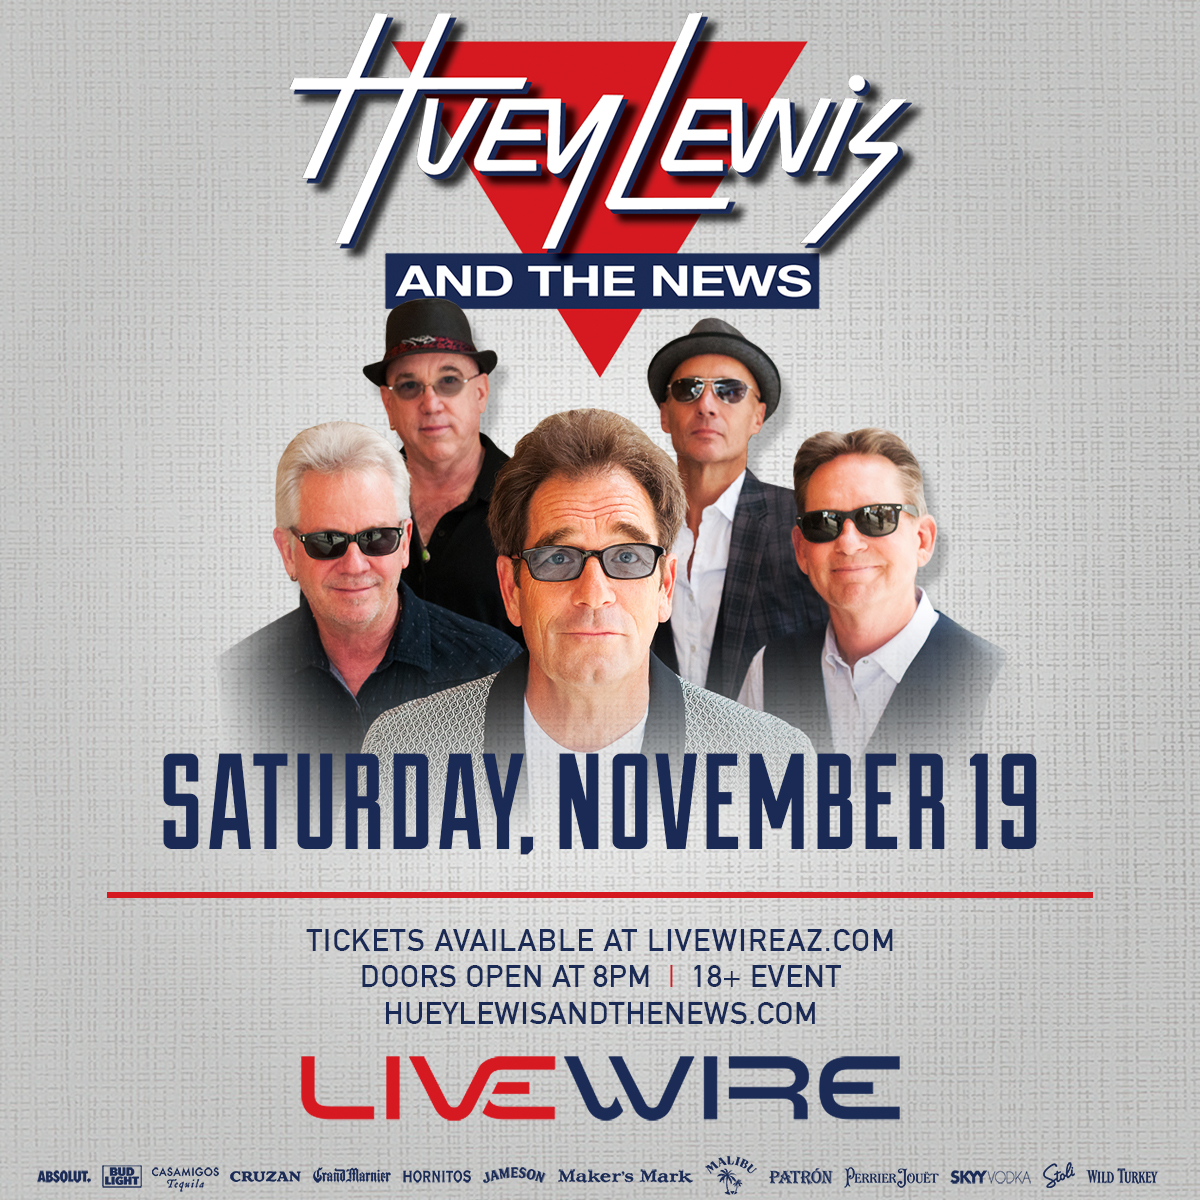 Huey Lewis & The News Tickets 11/19/16